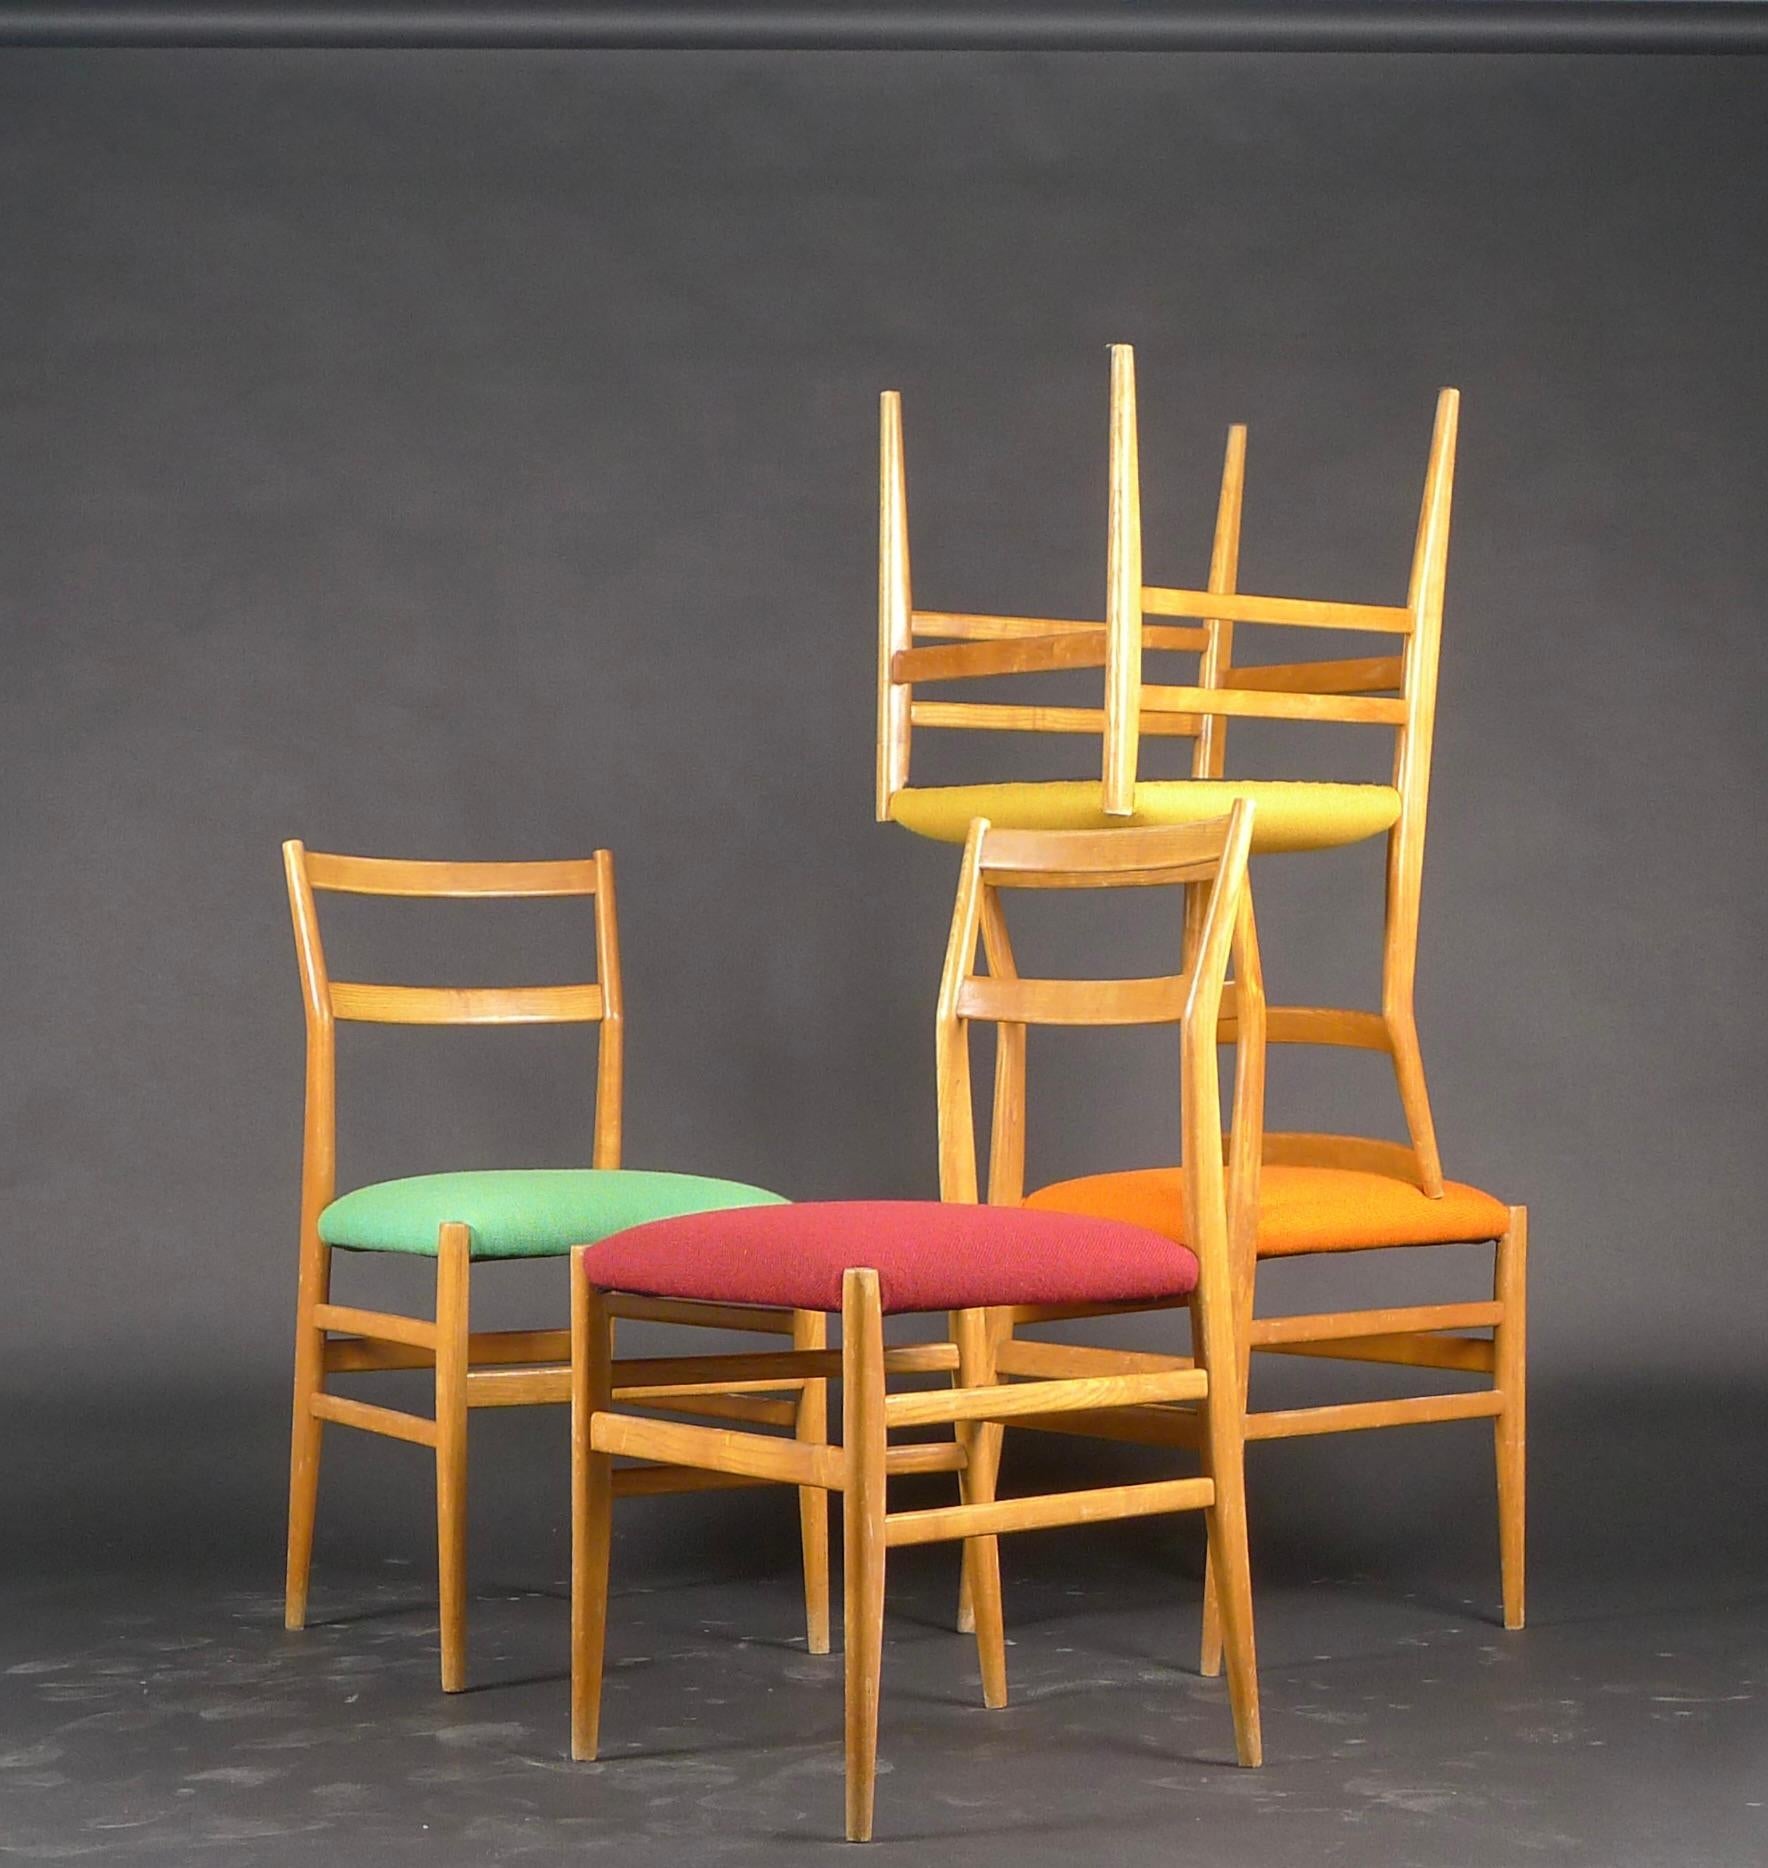 Gio Ponti for Cassina, Harlequin Set of Leggera Chairs, Model 646 in Ash, 1950s In Good Condition For Sale In Wargrave, Berkshire